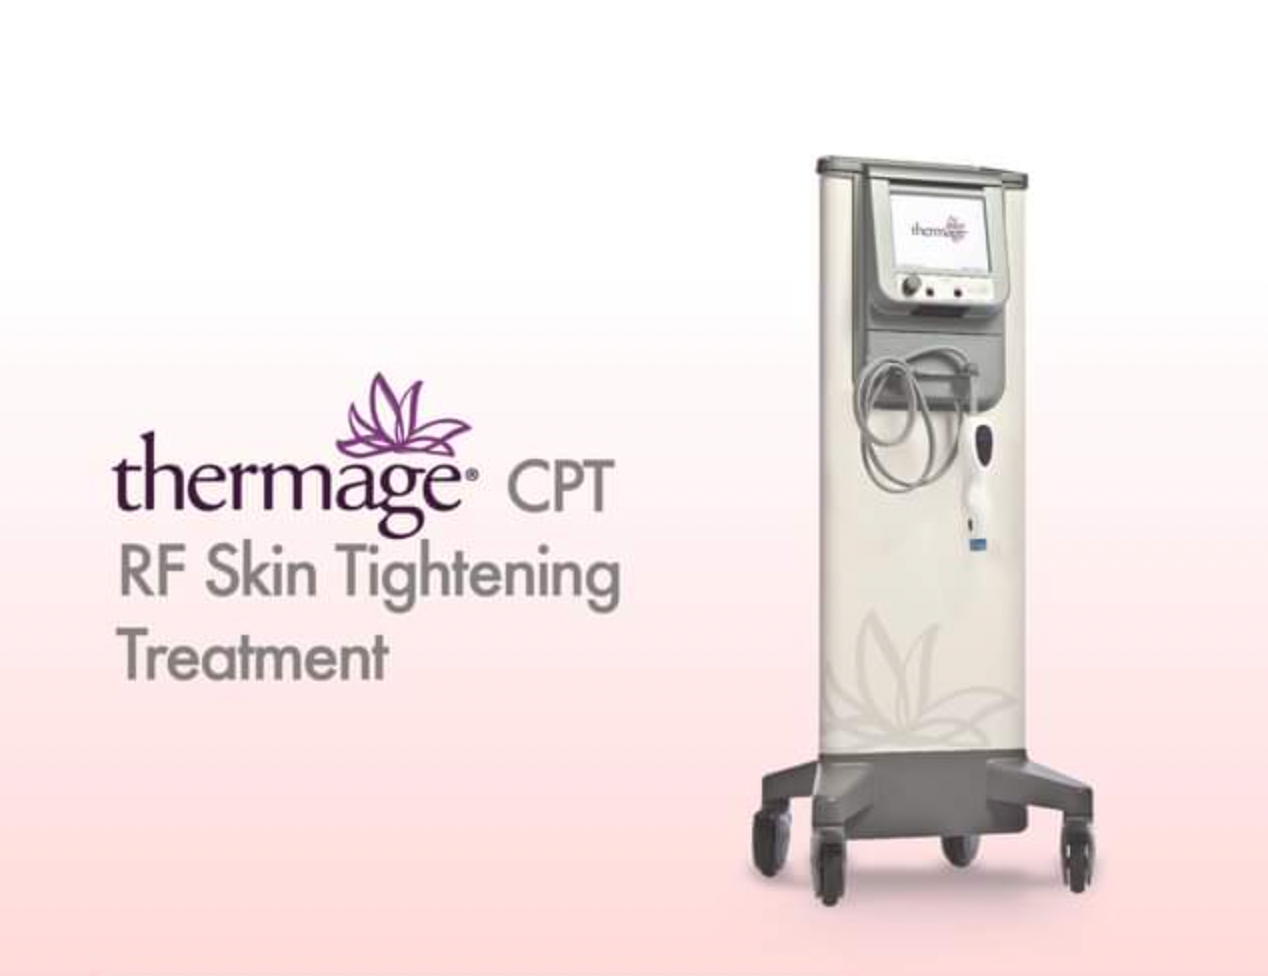 About Thermage®